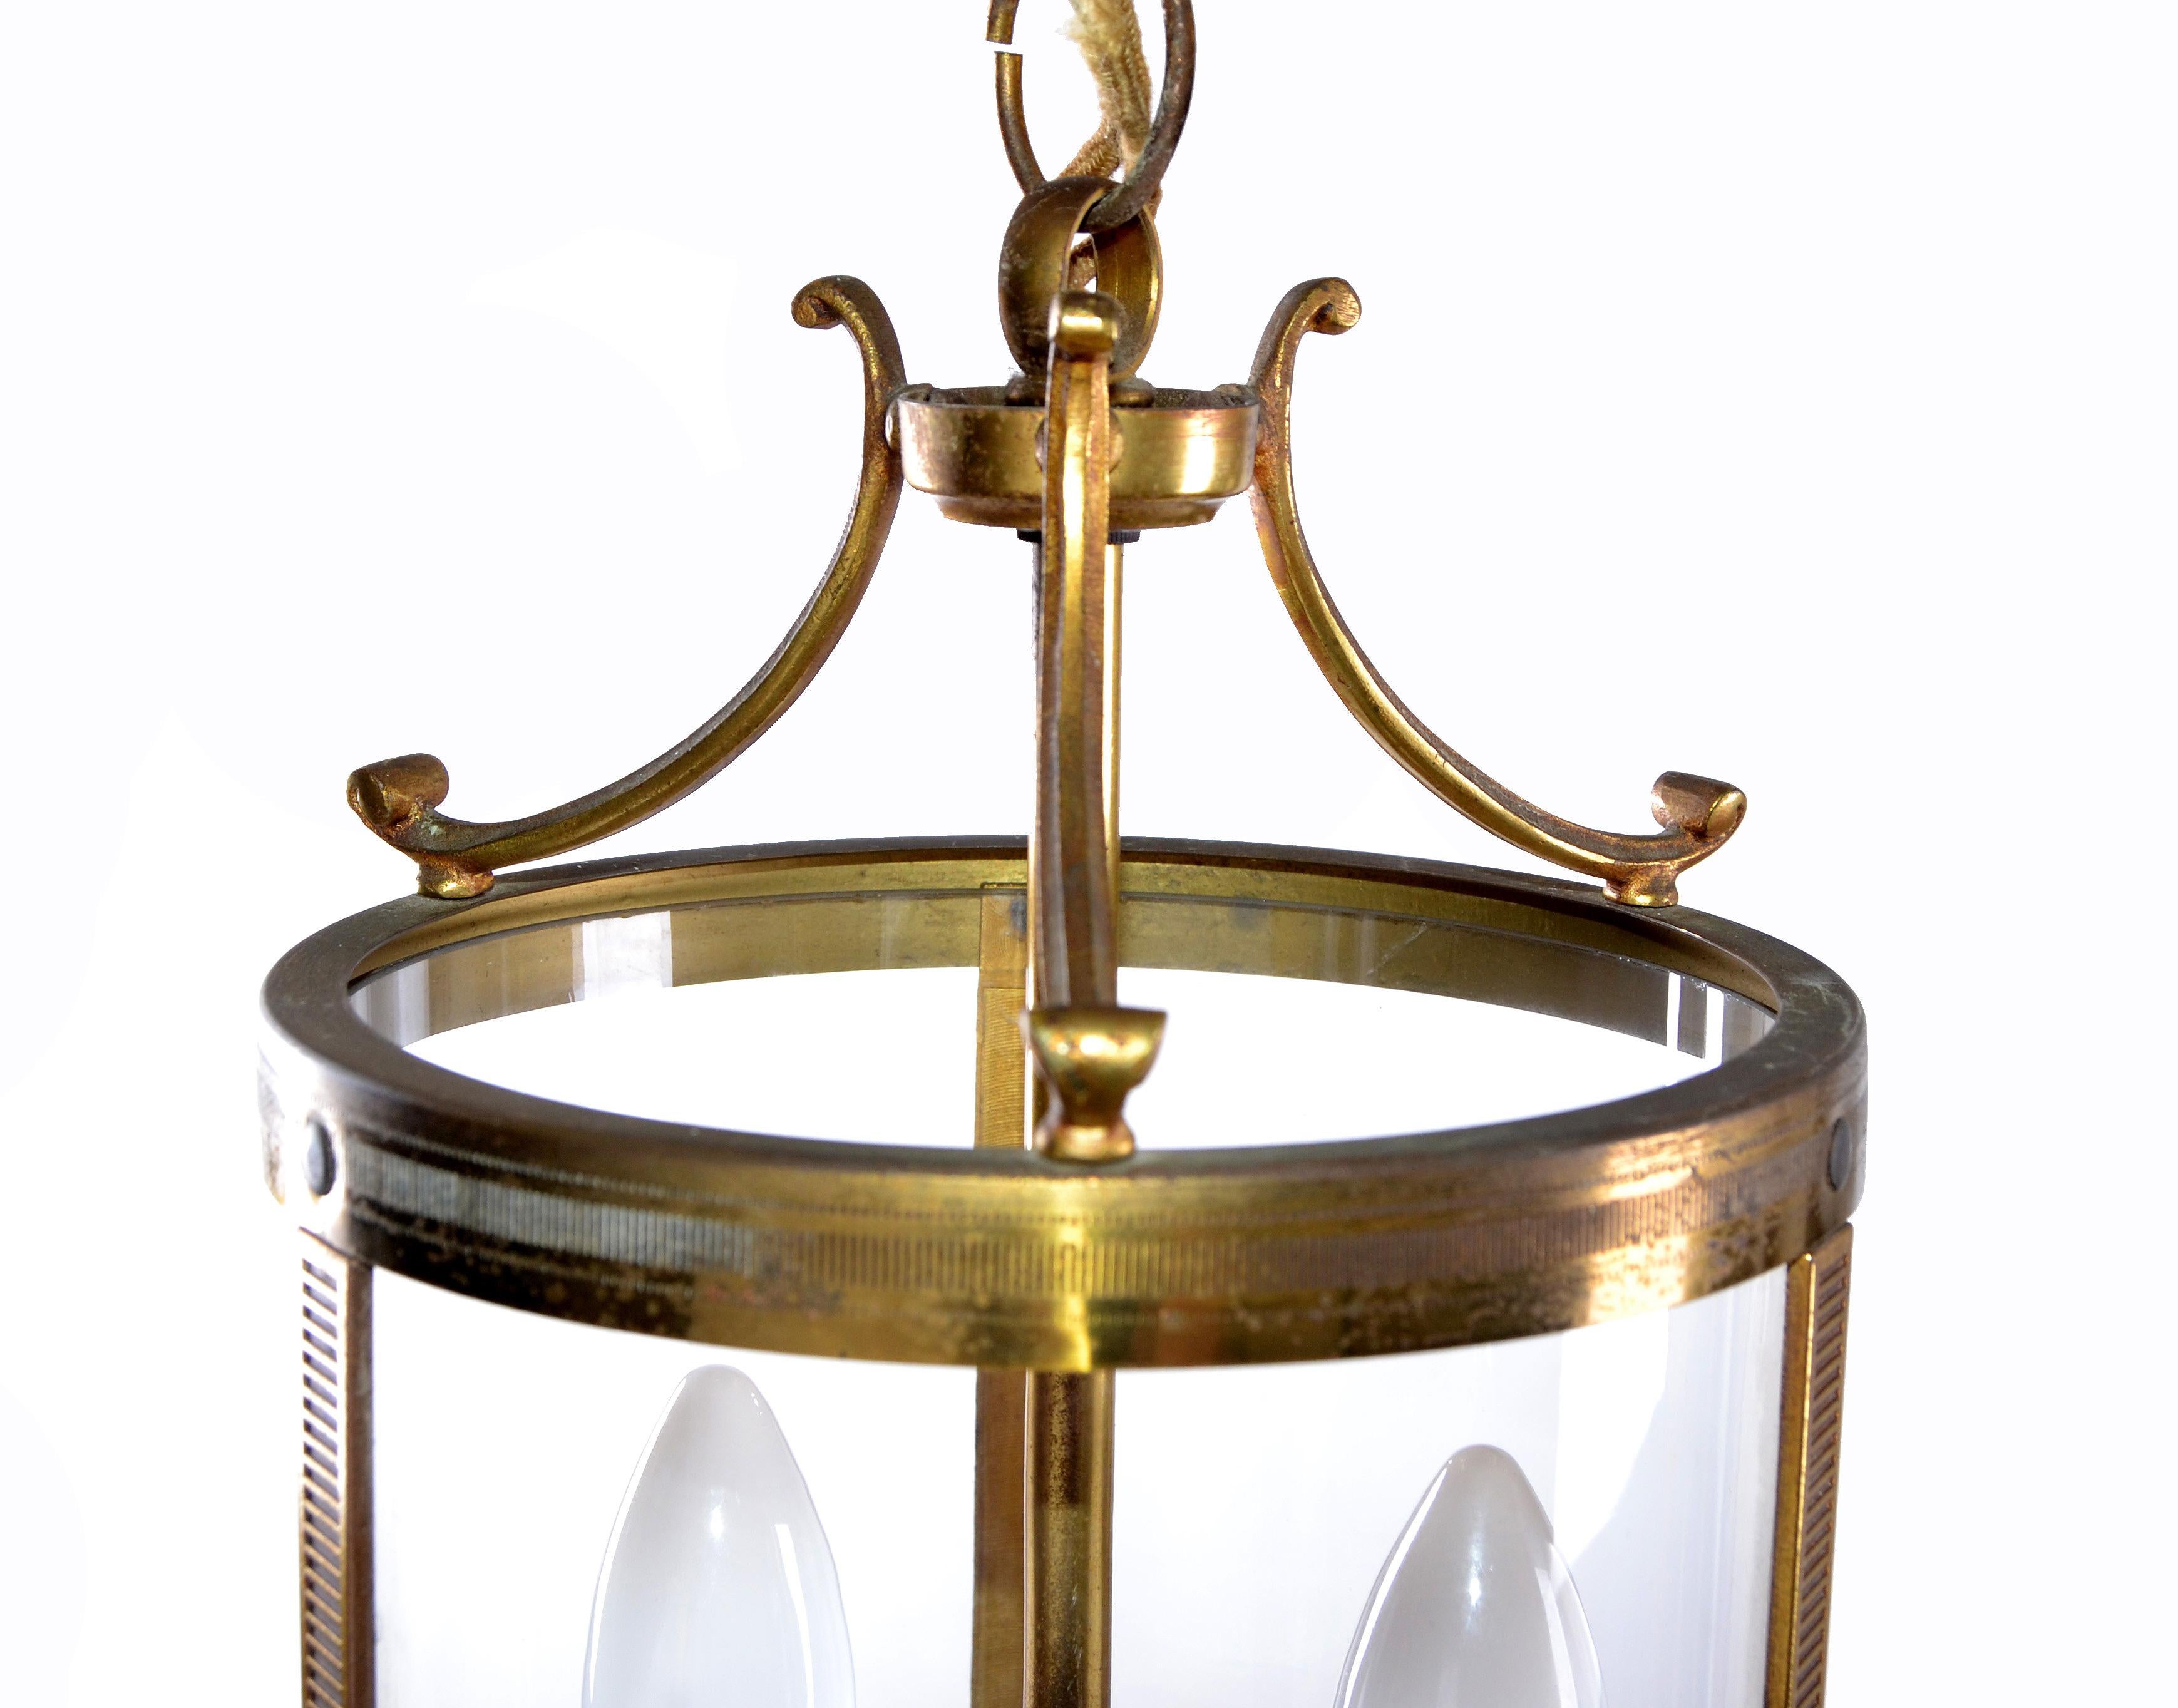 Hand-Crafted French Parisian Two-Light Glass & Bronze Lantern with Canopy